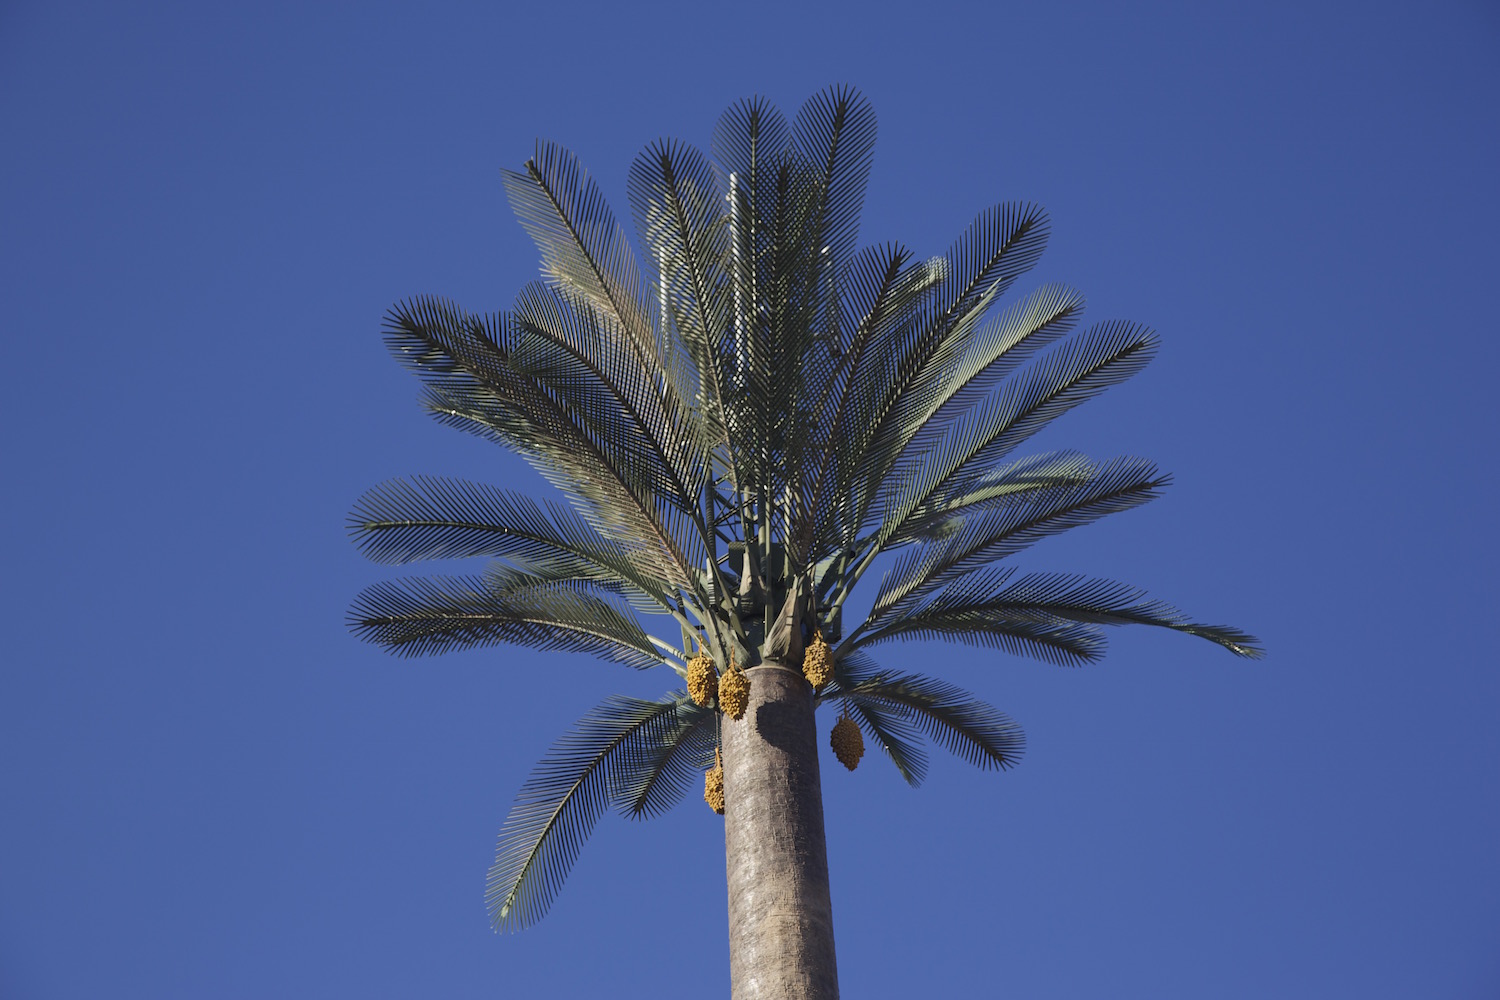 Jami' al-Kutubiyya - <p>Detail view of a mobile phone tower shaped as a date palm</p>